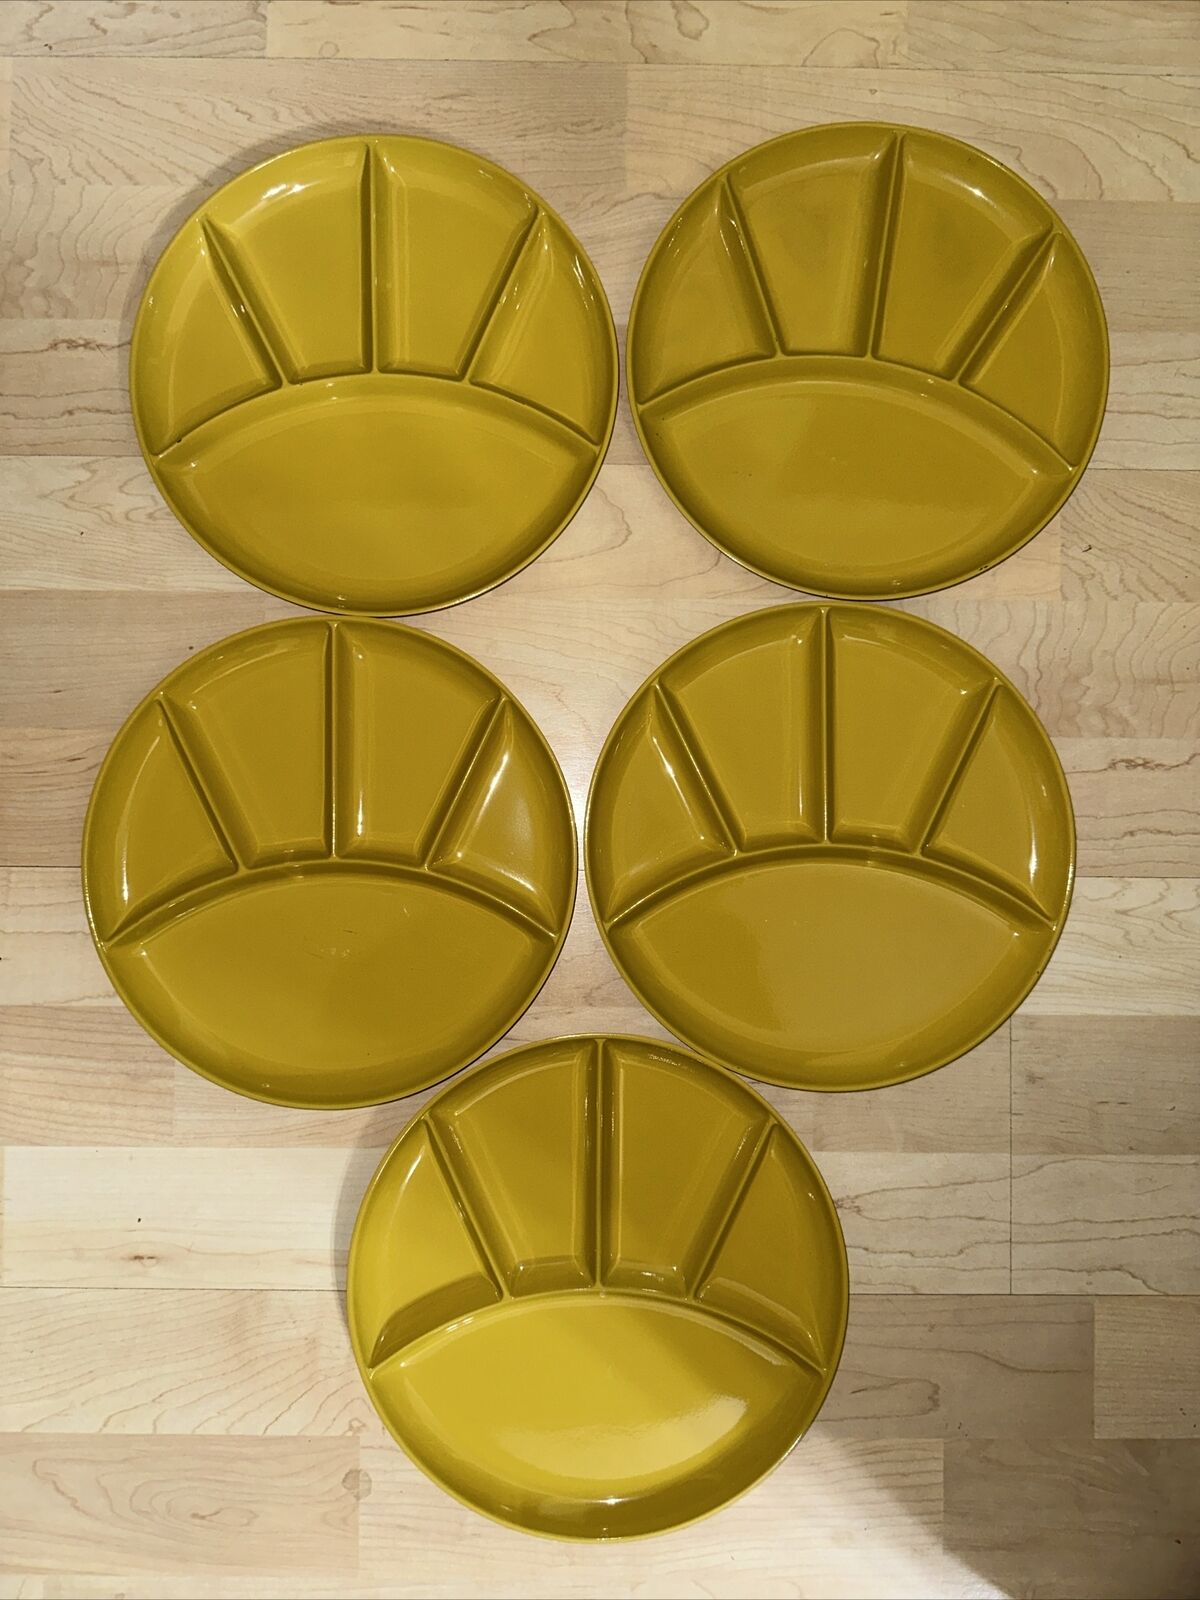 SET of 5-Imperial International Divided Sushi Melmac Plates Japan GOLD YELLOW IMPERIAL